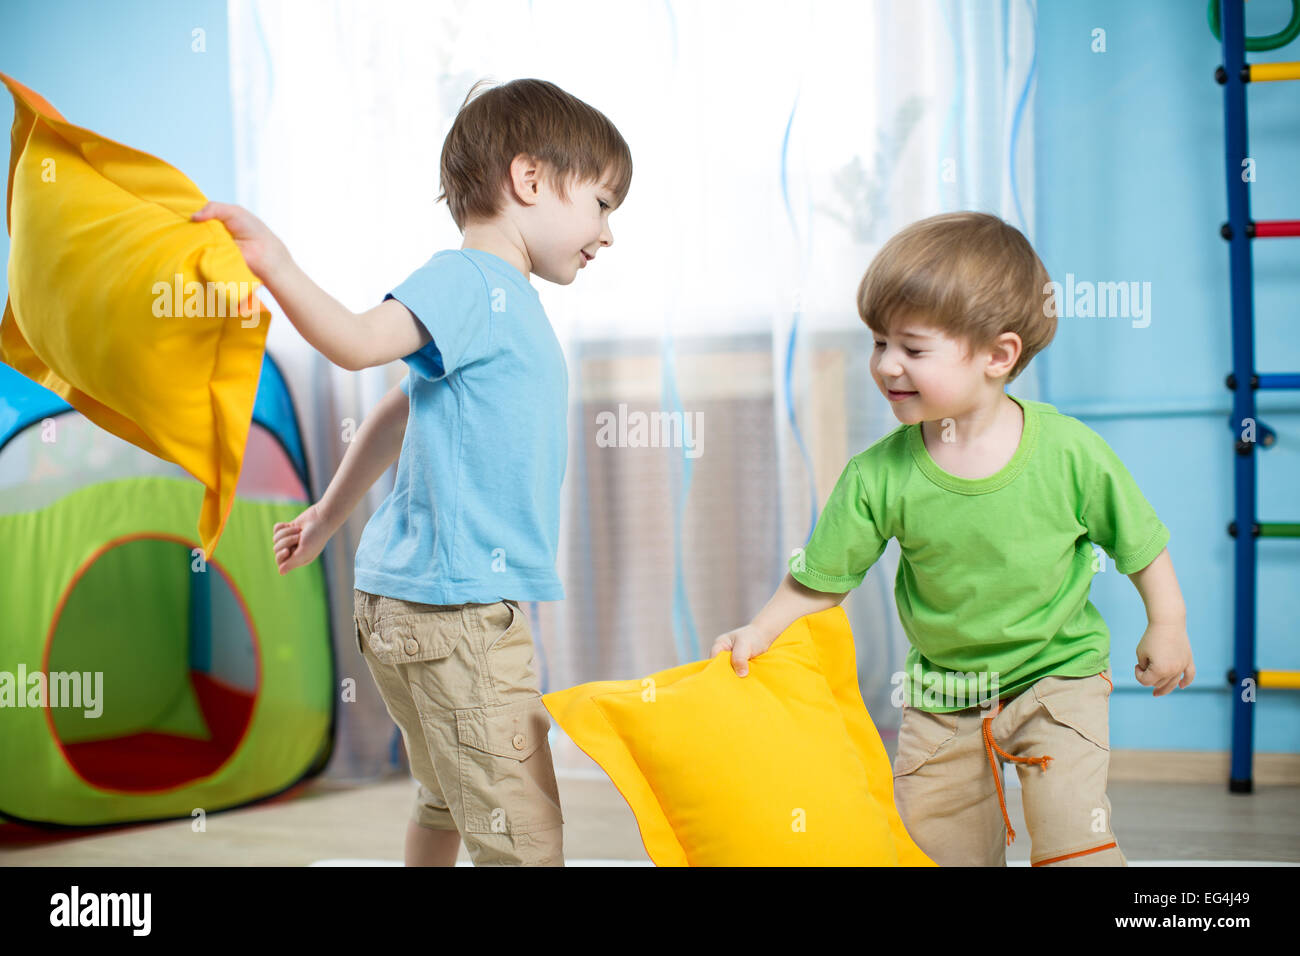 kids boys  playing with pillows Stock Photo